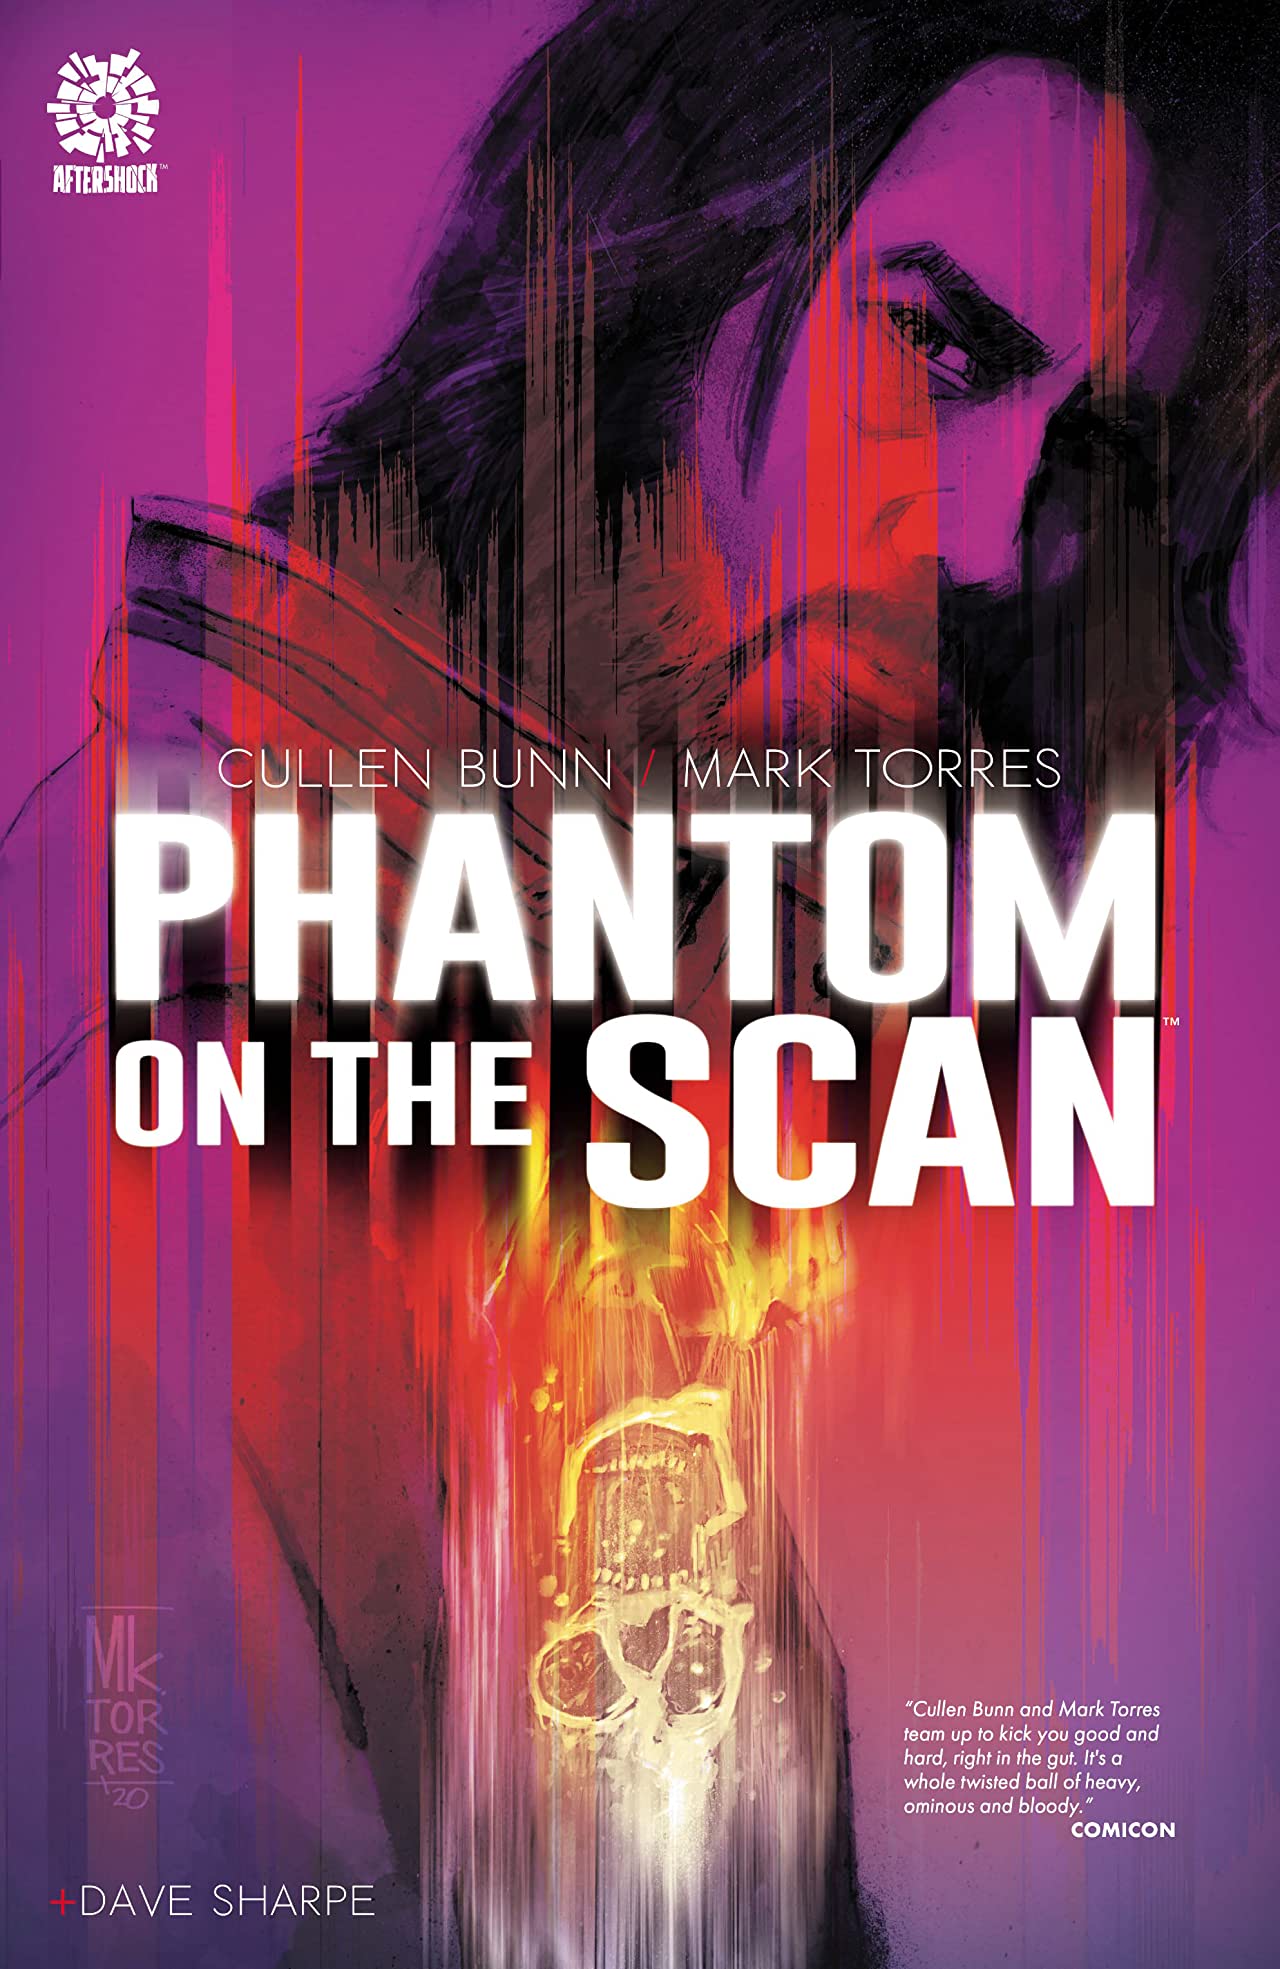 Phantom on The Scan: The Complete Series TPB